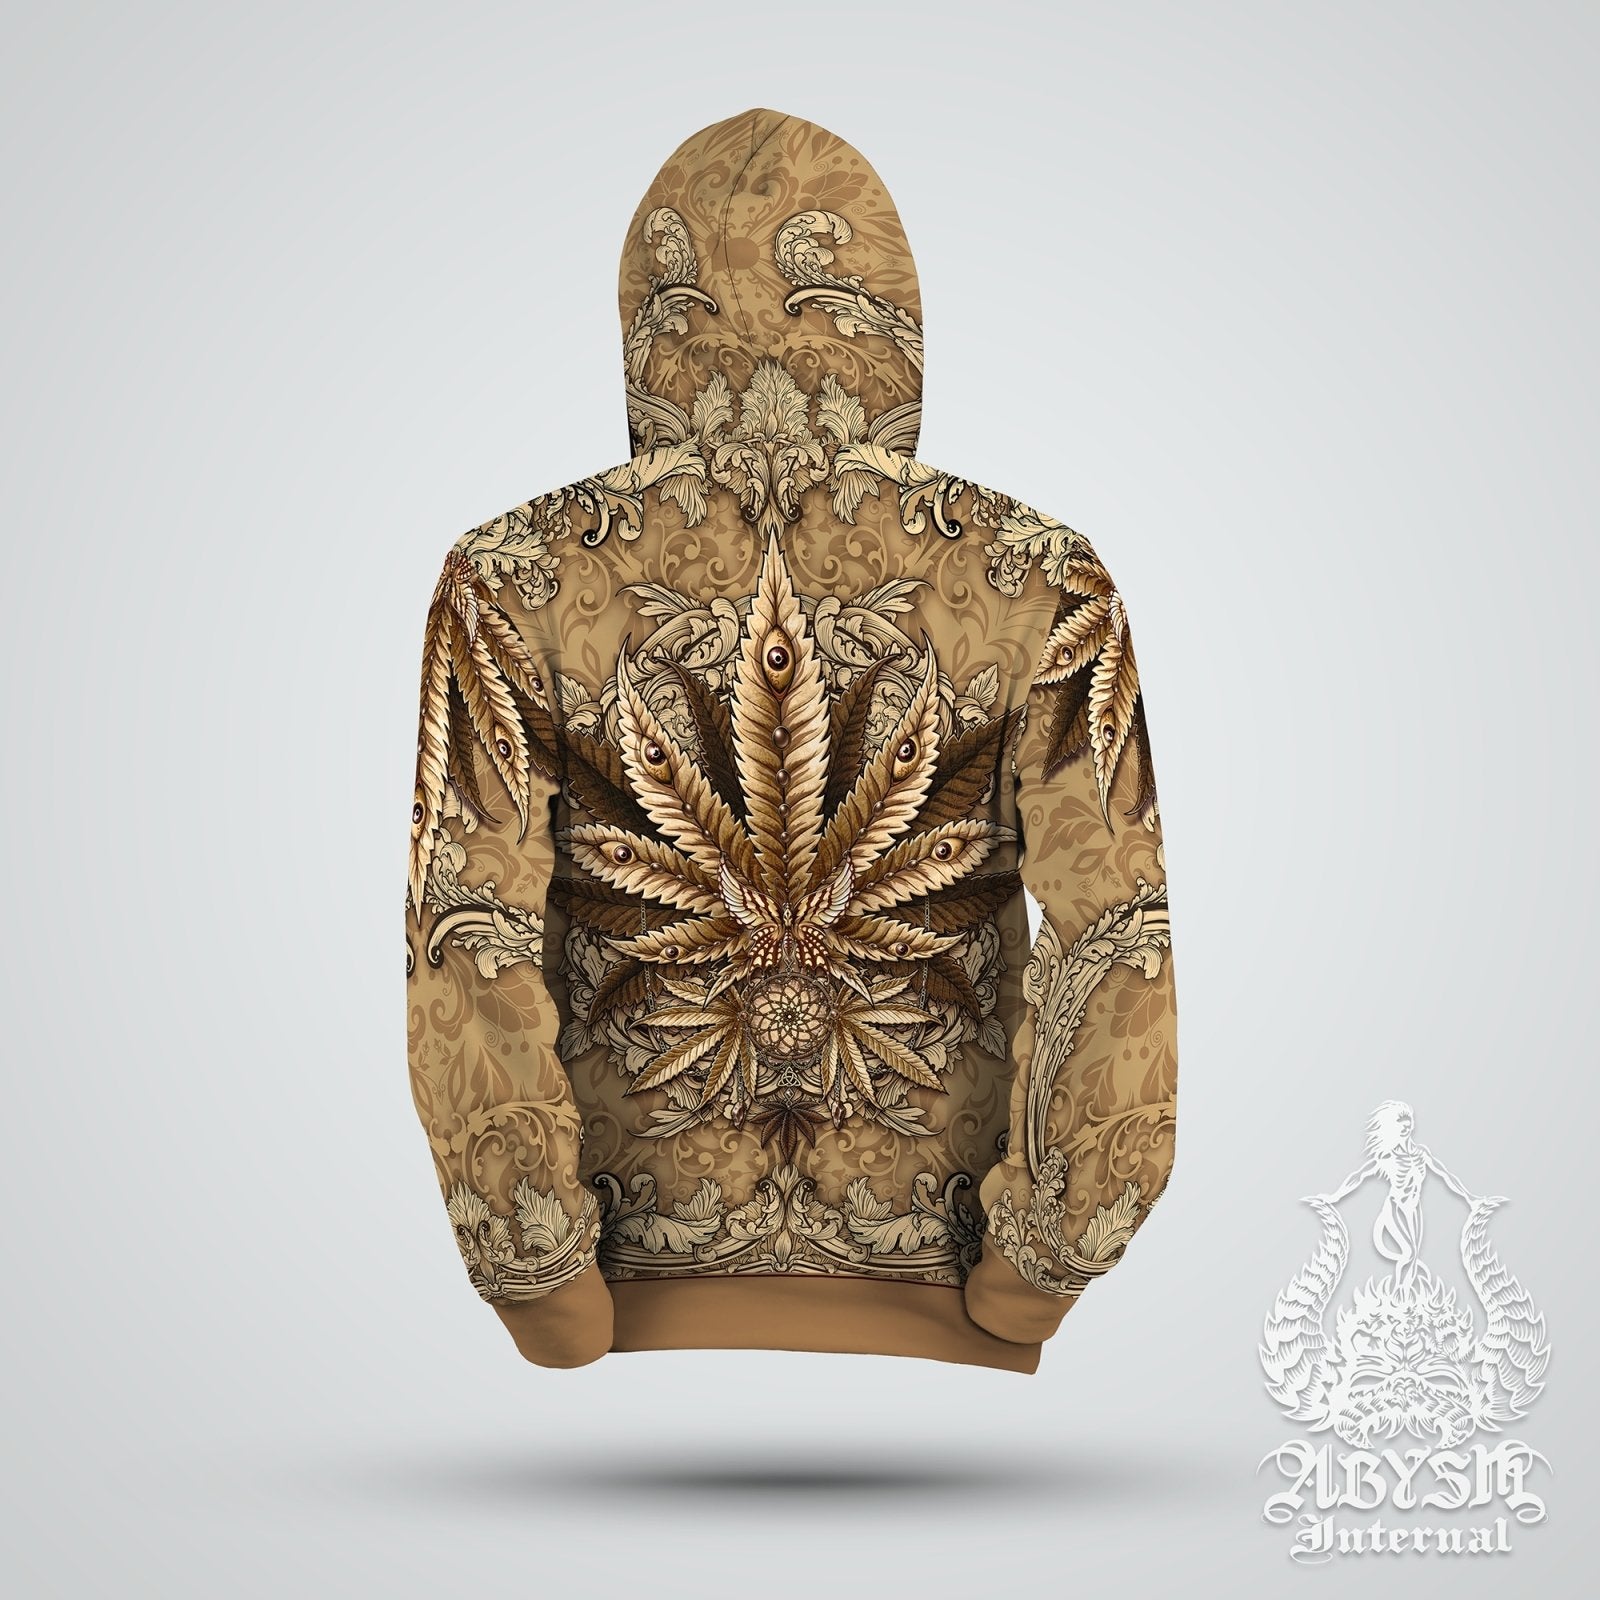 Cannabis Hoodie, Weed Hippie Clothes, Festival Outfit, Trippy Streetwear, Indie and Alternative Clothing, Unisex, 420 Gift - Marijuana, Cream - Abysm Internal